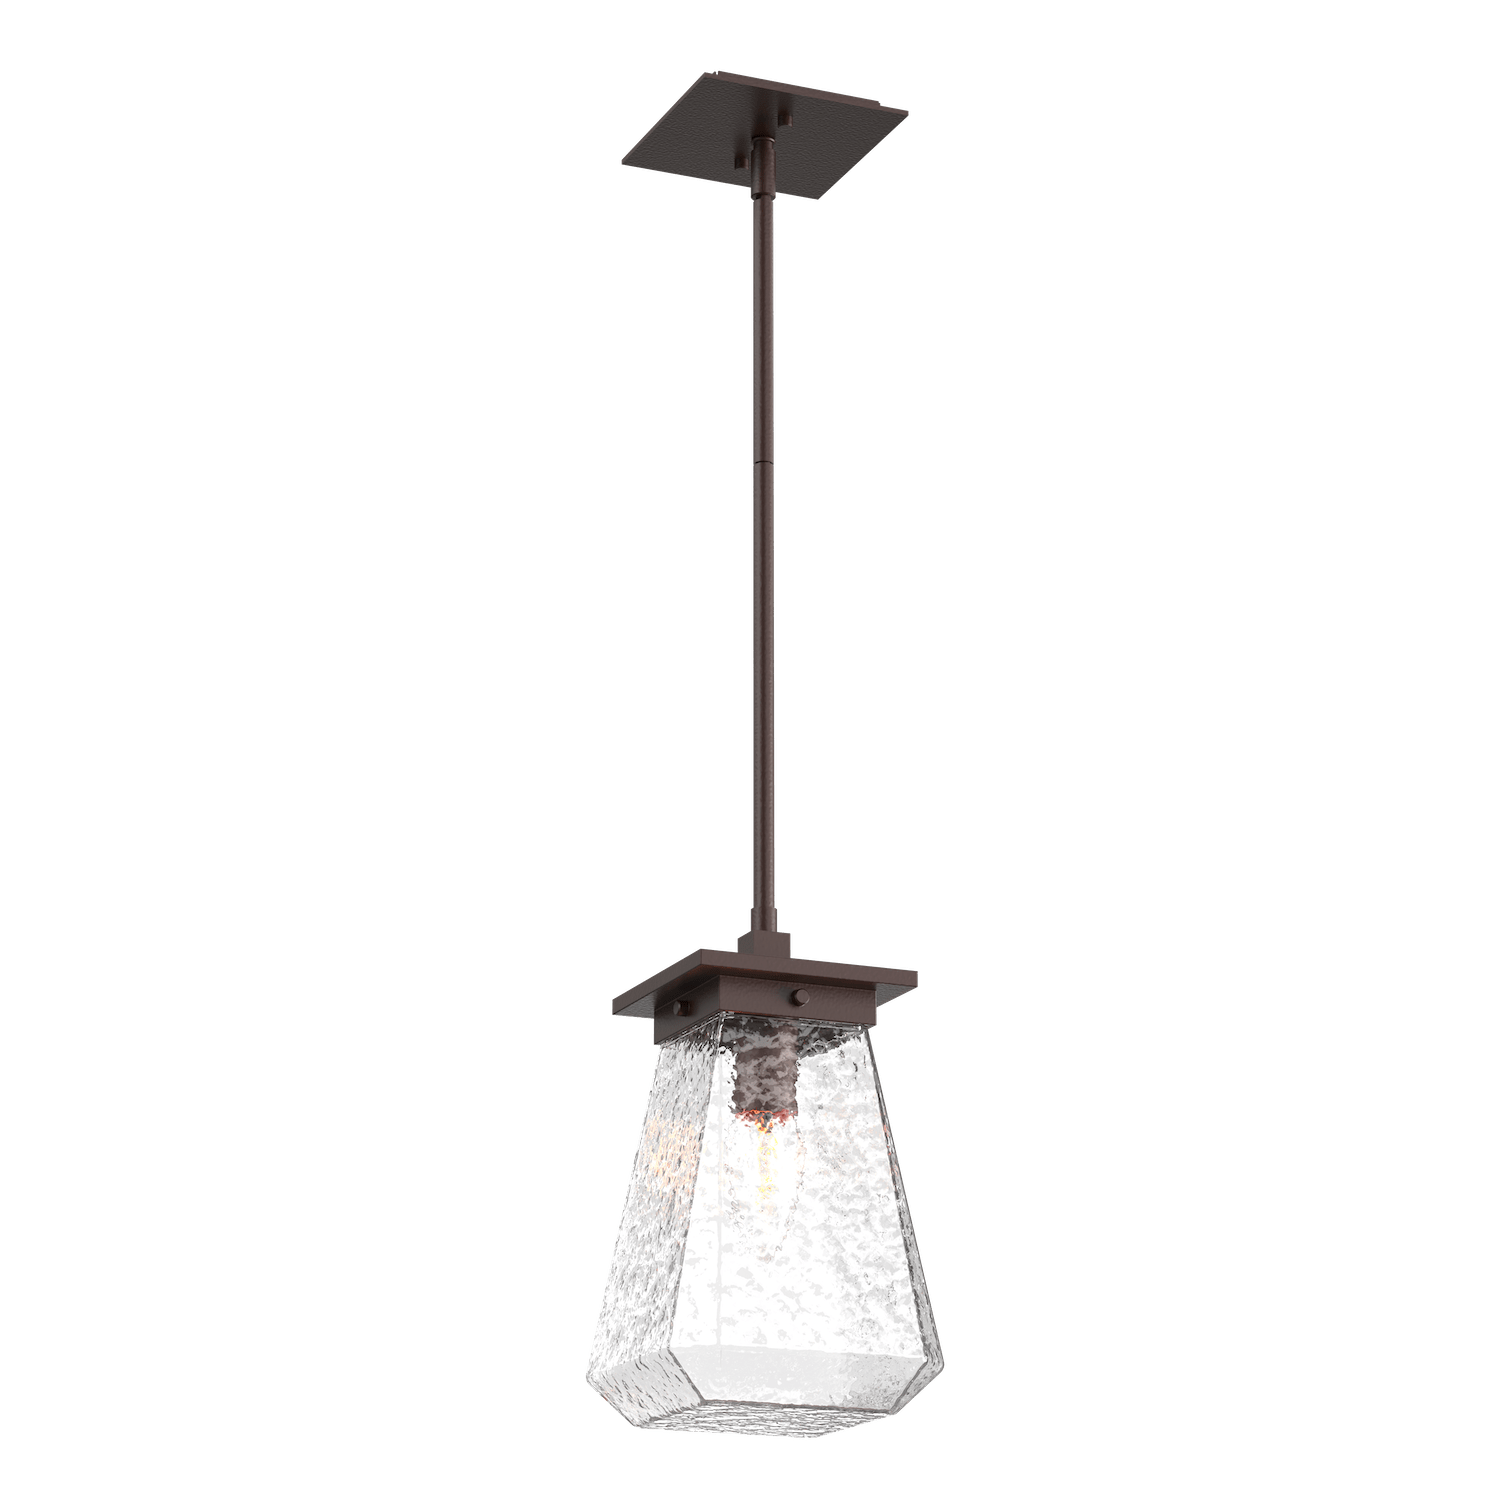 OPB0043-AH-SB-C-Hammerton-Studio-Beacon-14-inch-outdoor-pendant-light-with-statuary-bronze-finish-and-clear-blown-glass-shades-and-incandescent-lamping